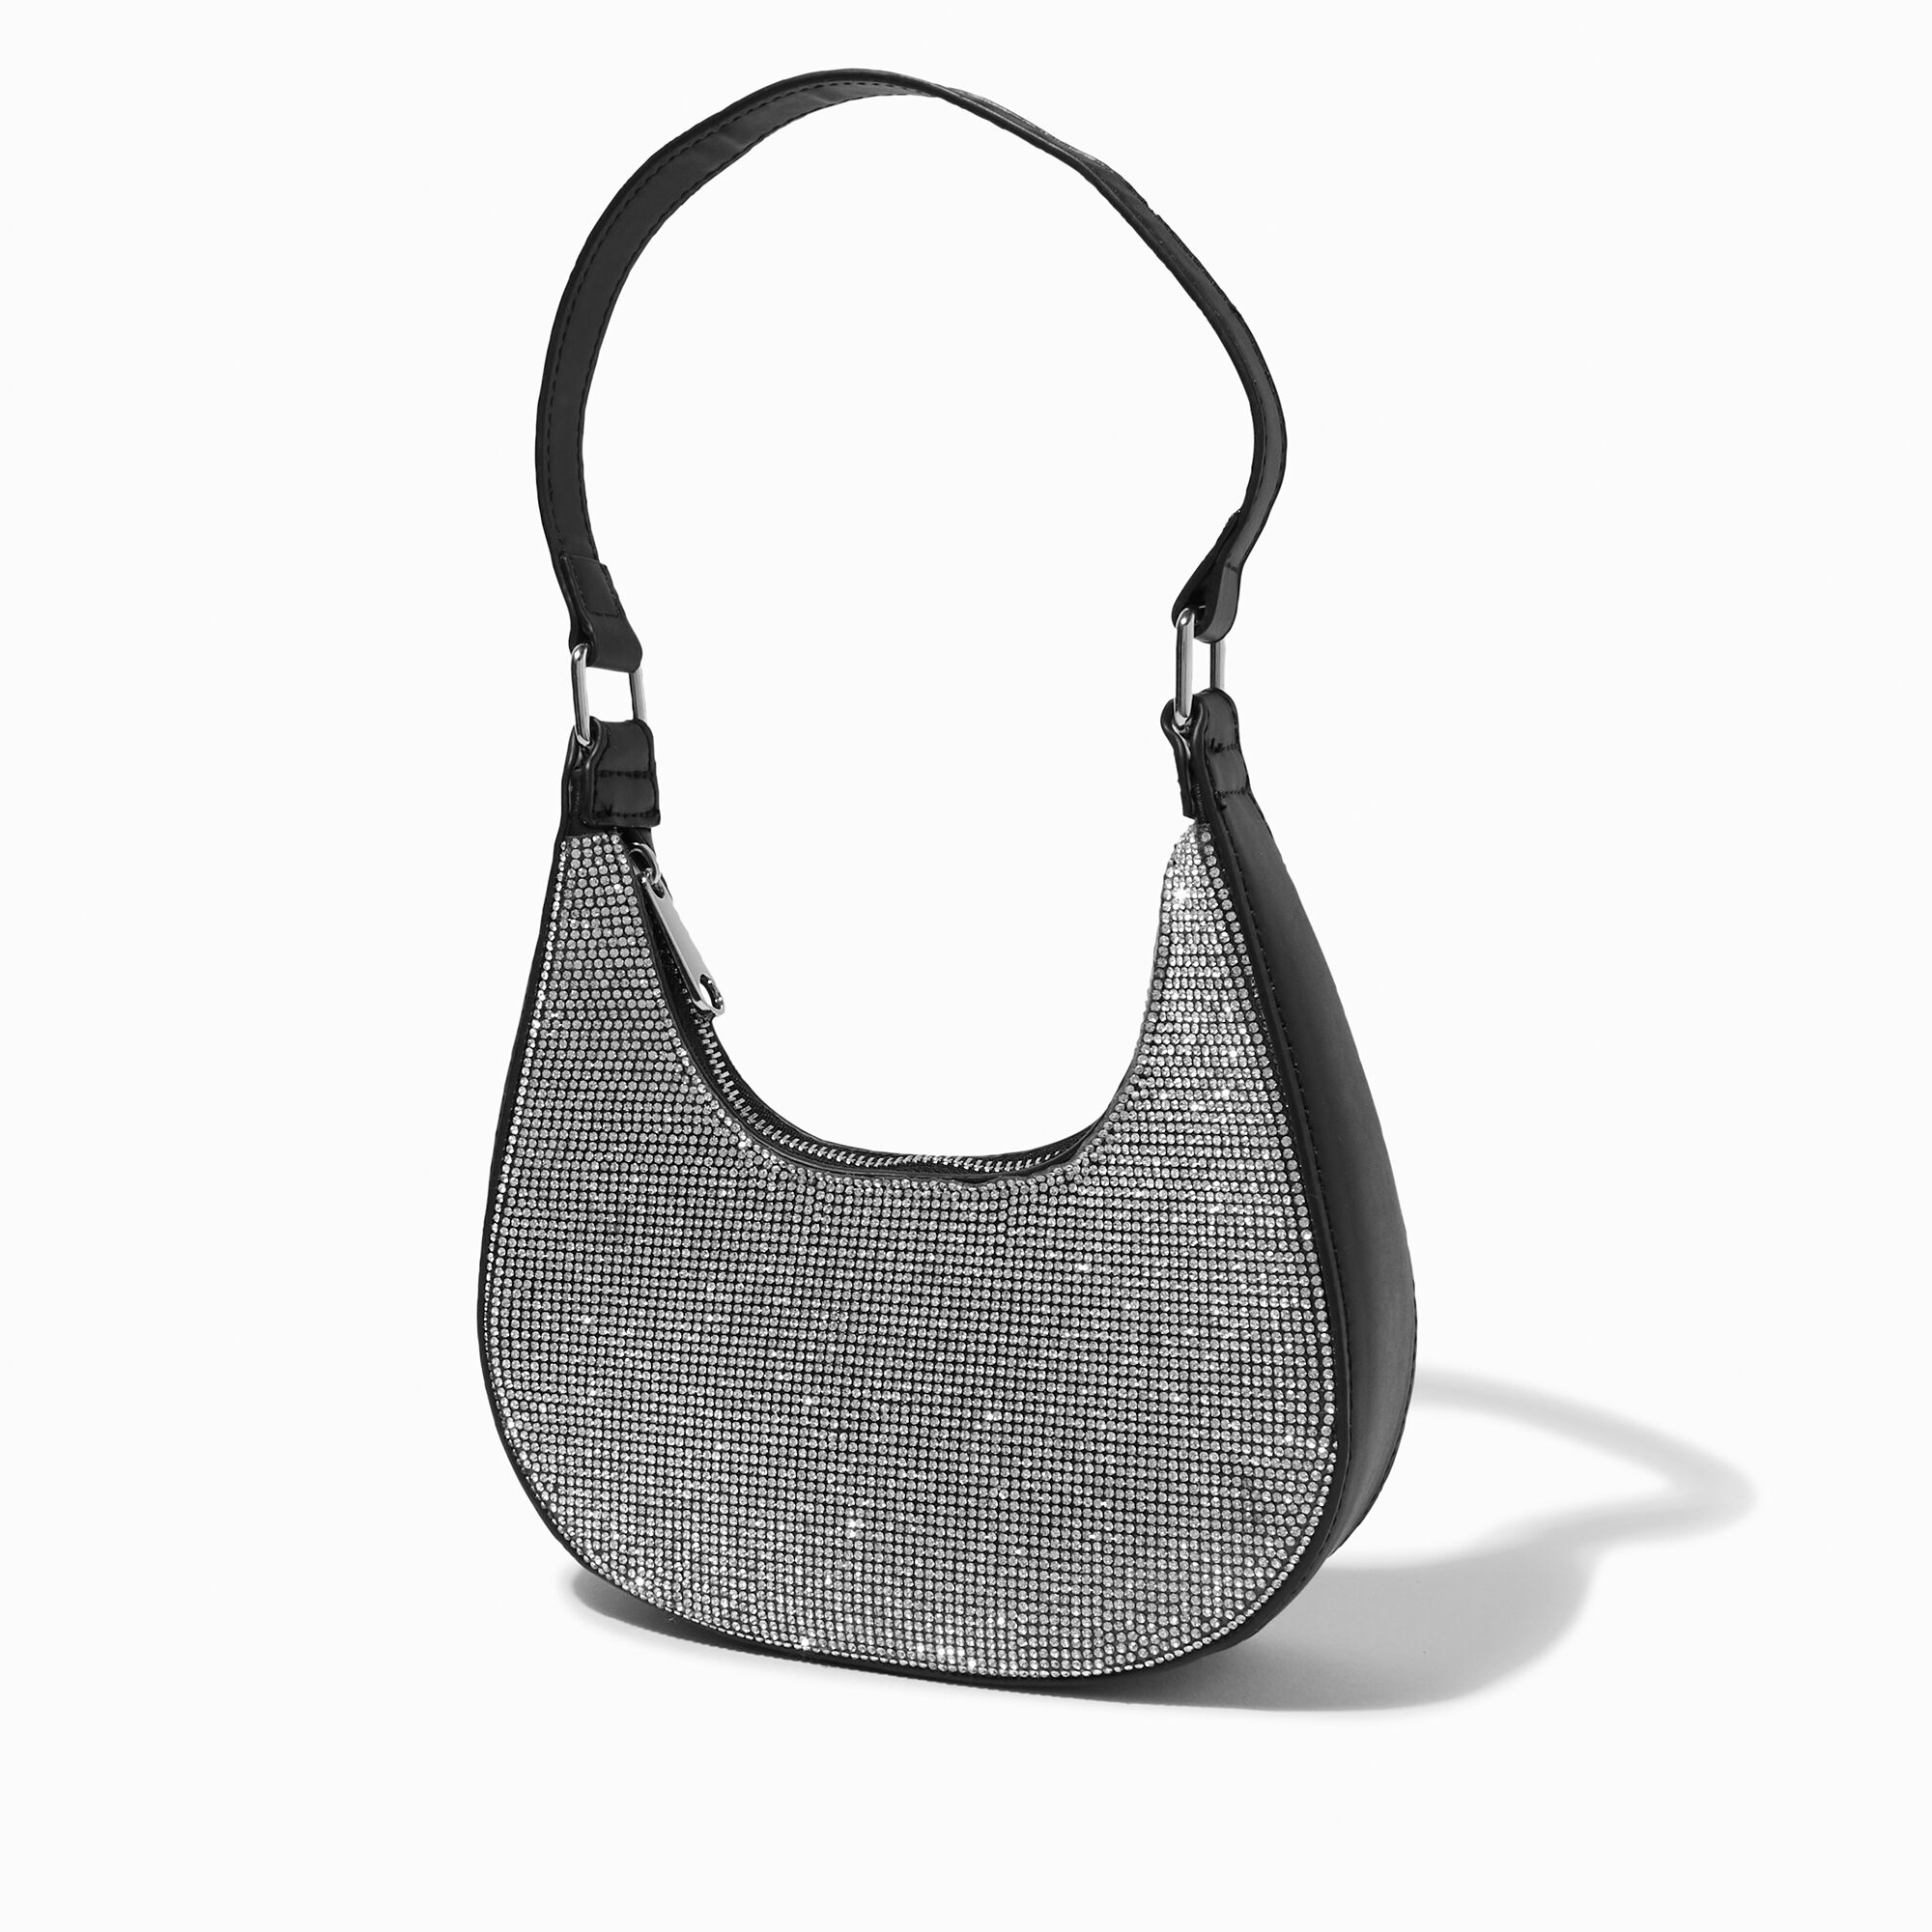 Designer Glitter Sparkly Shoulder Bag With Diamonds And Rhinestones For  Women Perfect For Evening Parties And Crossbody Wear From Bagreview, $60.55  | DHgate.Com